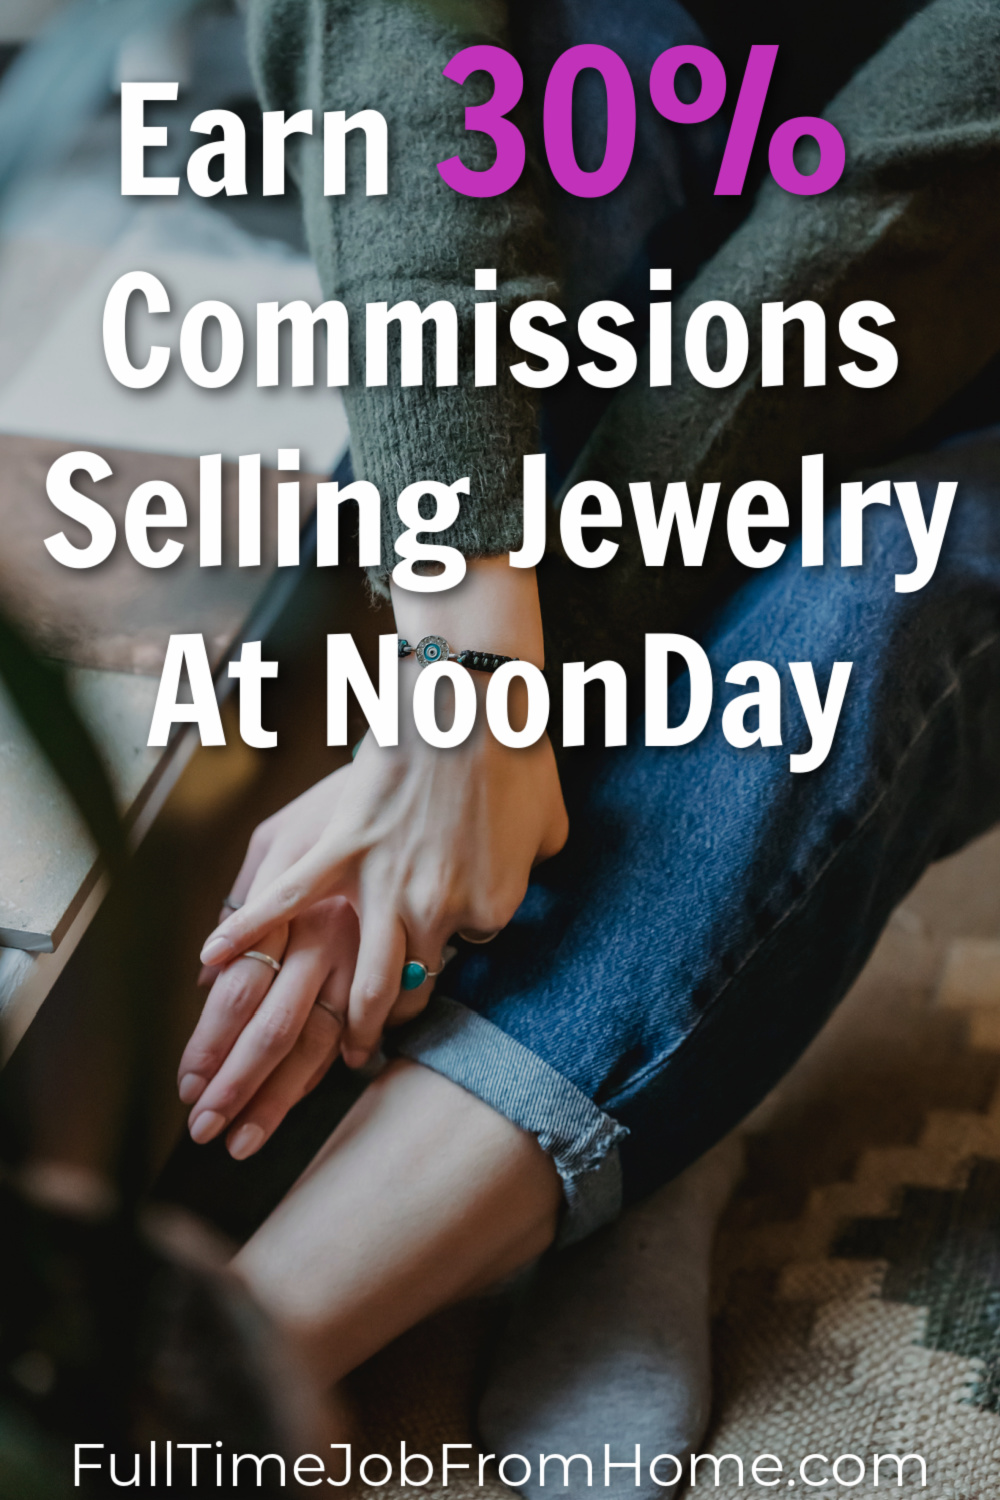 In this Noonday Direct Sales Review, we will see if you can really make money selling jewelry or if noonday is just another direct sales pyramid scheme